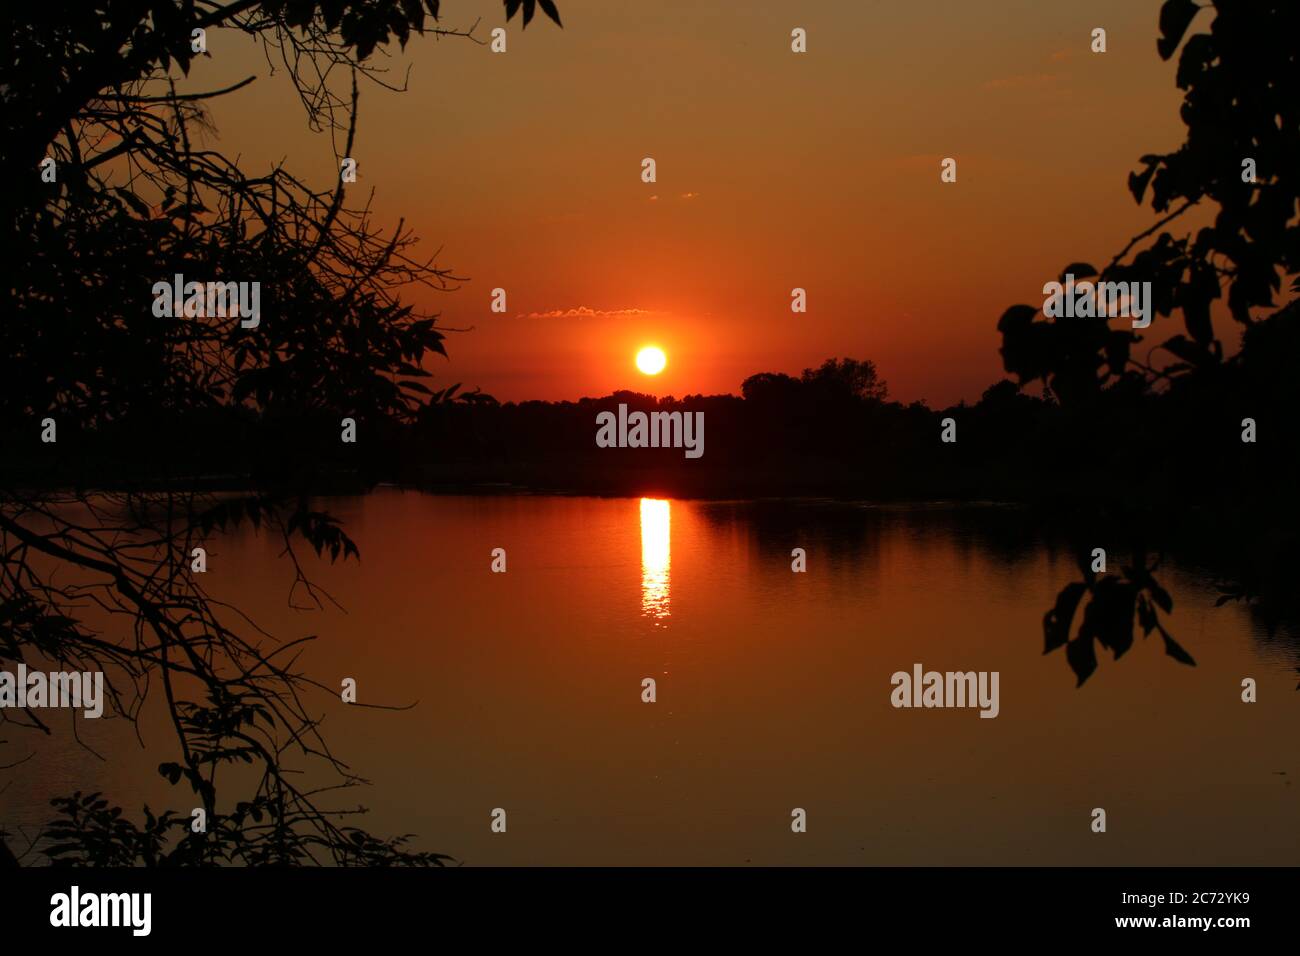 A great sunset with a lake view Stock Photo